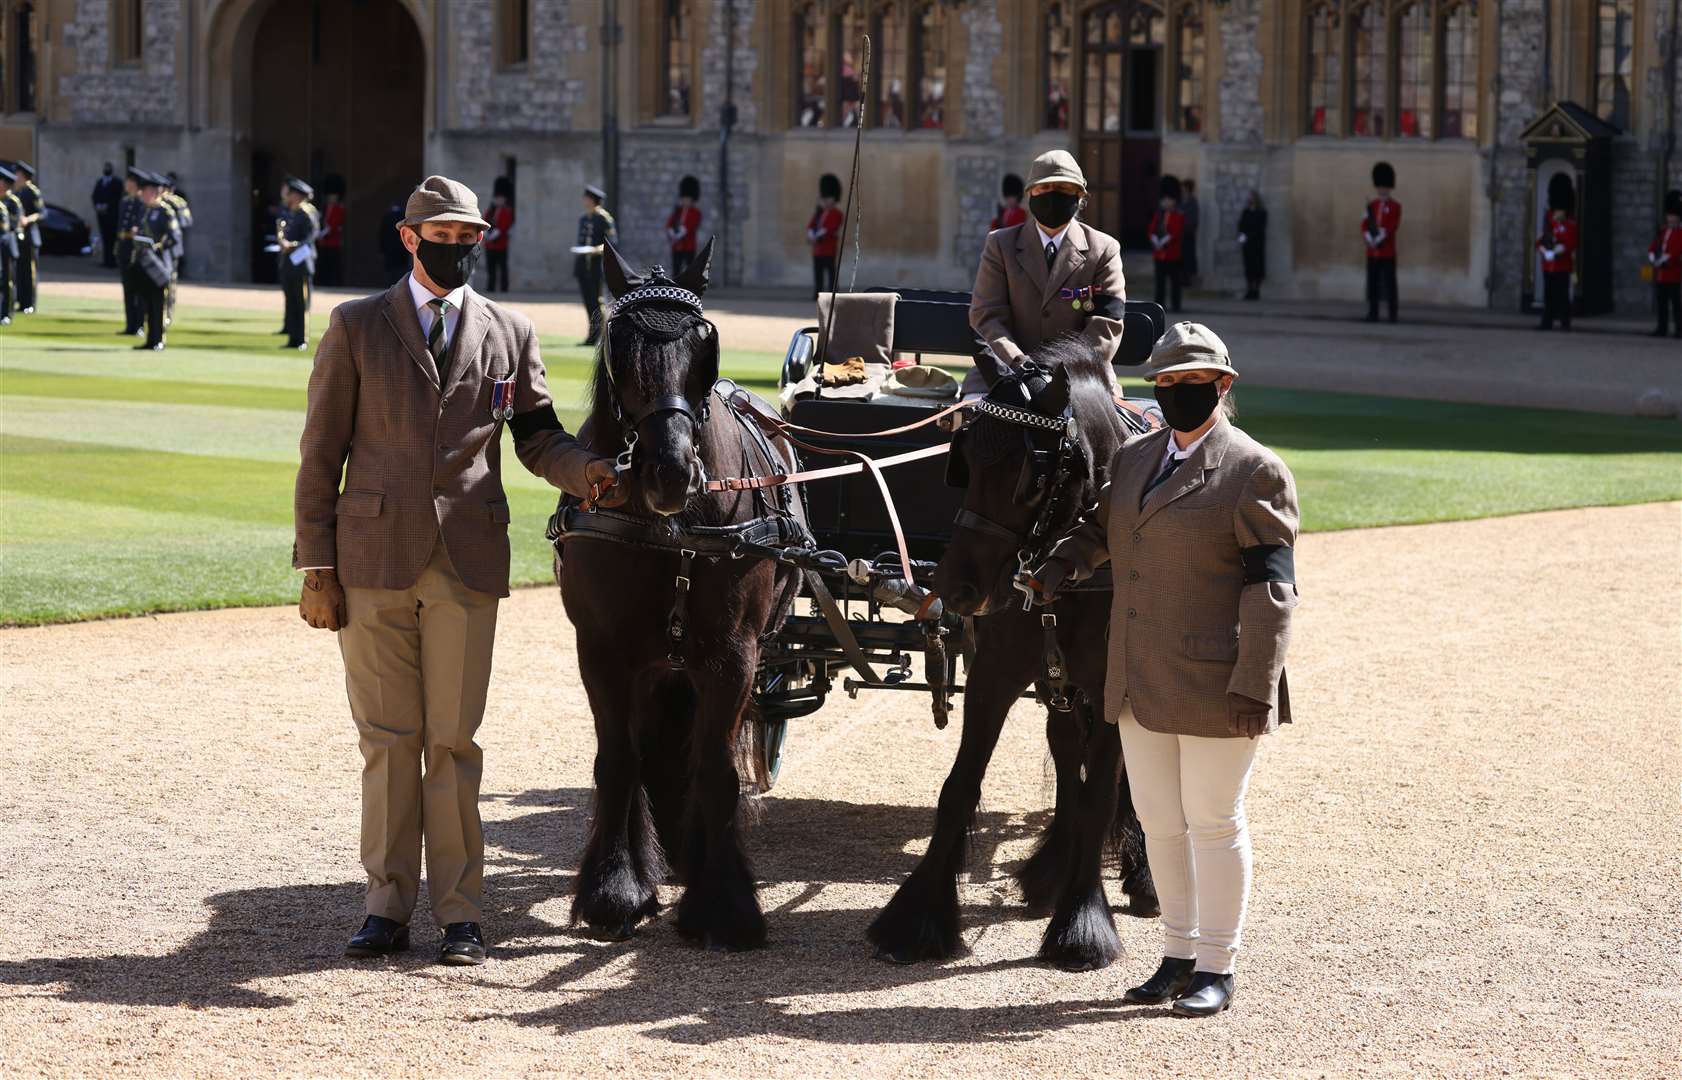 Fell ponies Balmoral Nevis and Notlaw Storm and the Duke of Edinburgh’s driving carriage in the Quadrangle at Windsor Castle (Ian Vogler/Daily Mirror/PA)